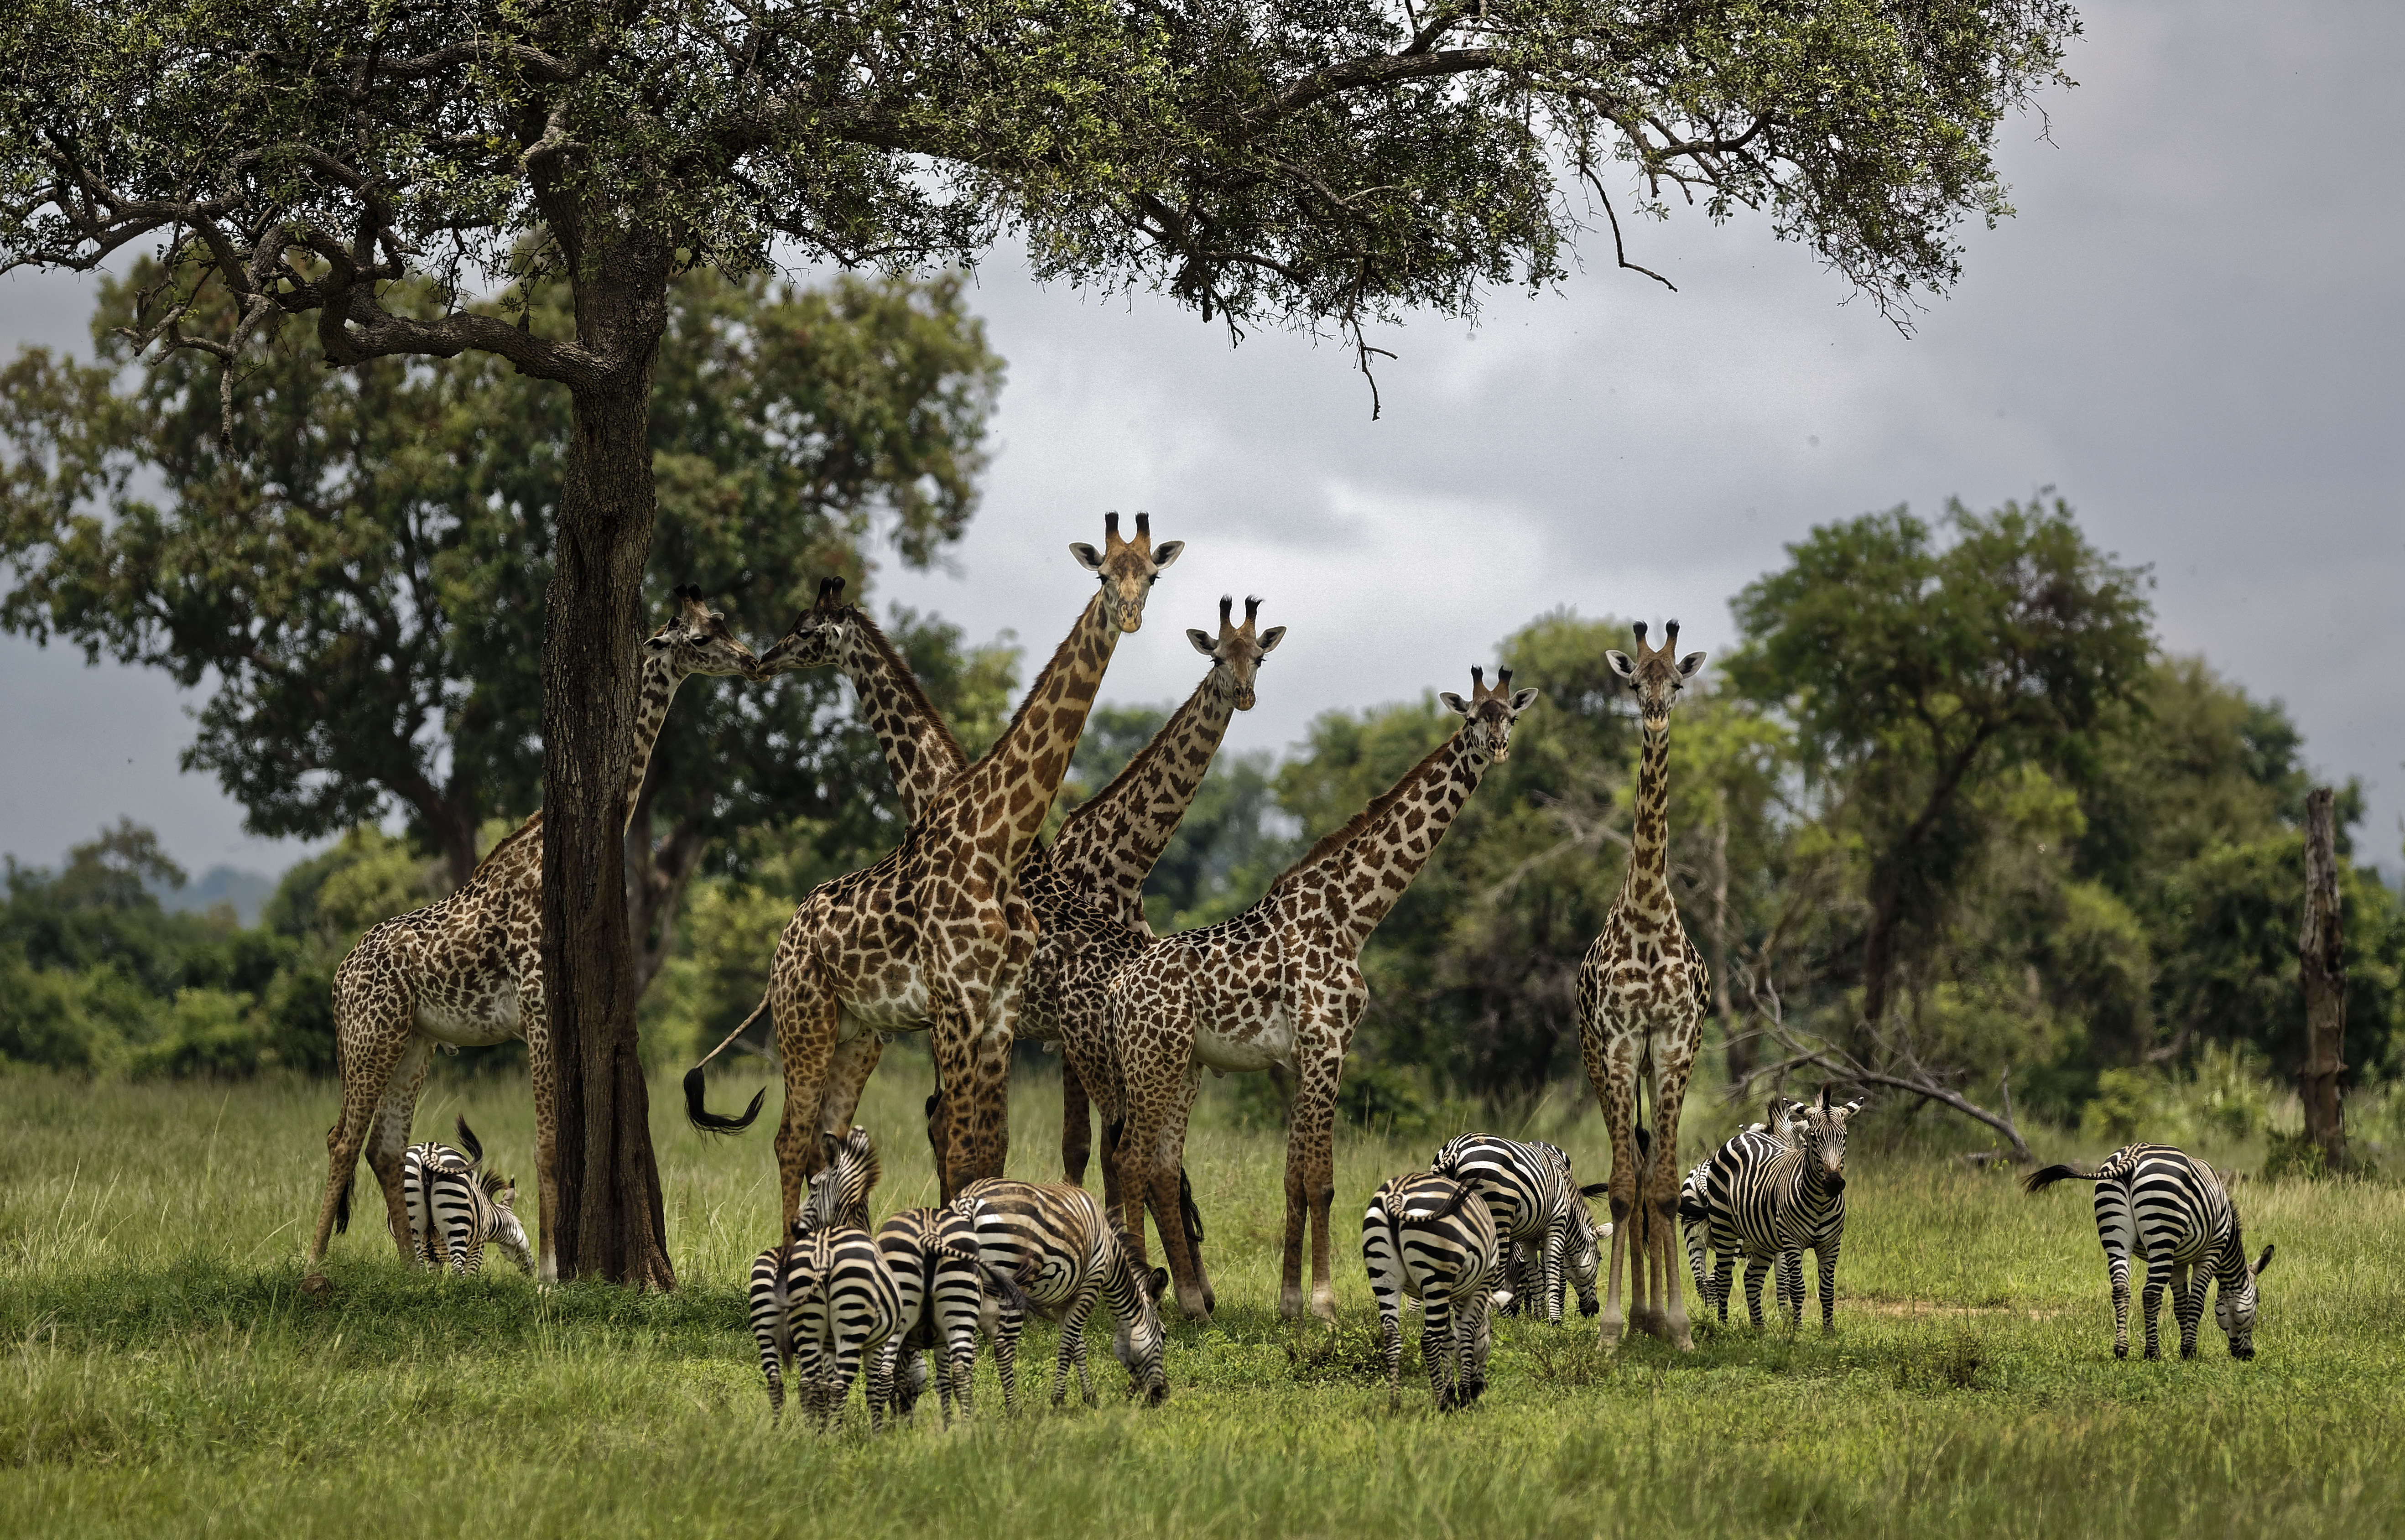 Giraffes and zebras congregate under the shade of a tree in Mikumi National Park (Ben Curtis/AP)